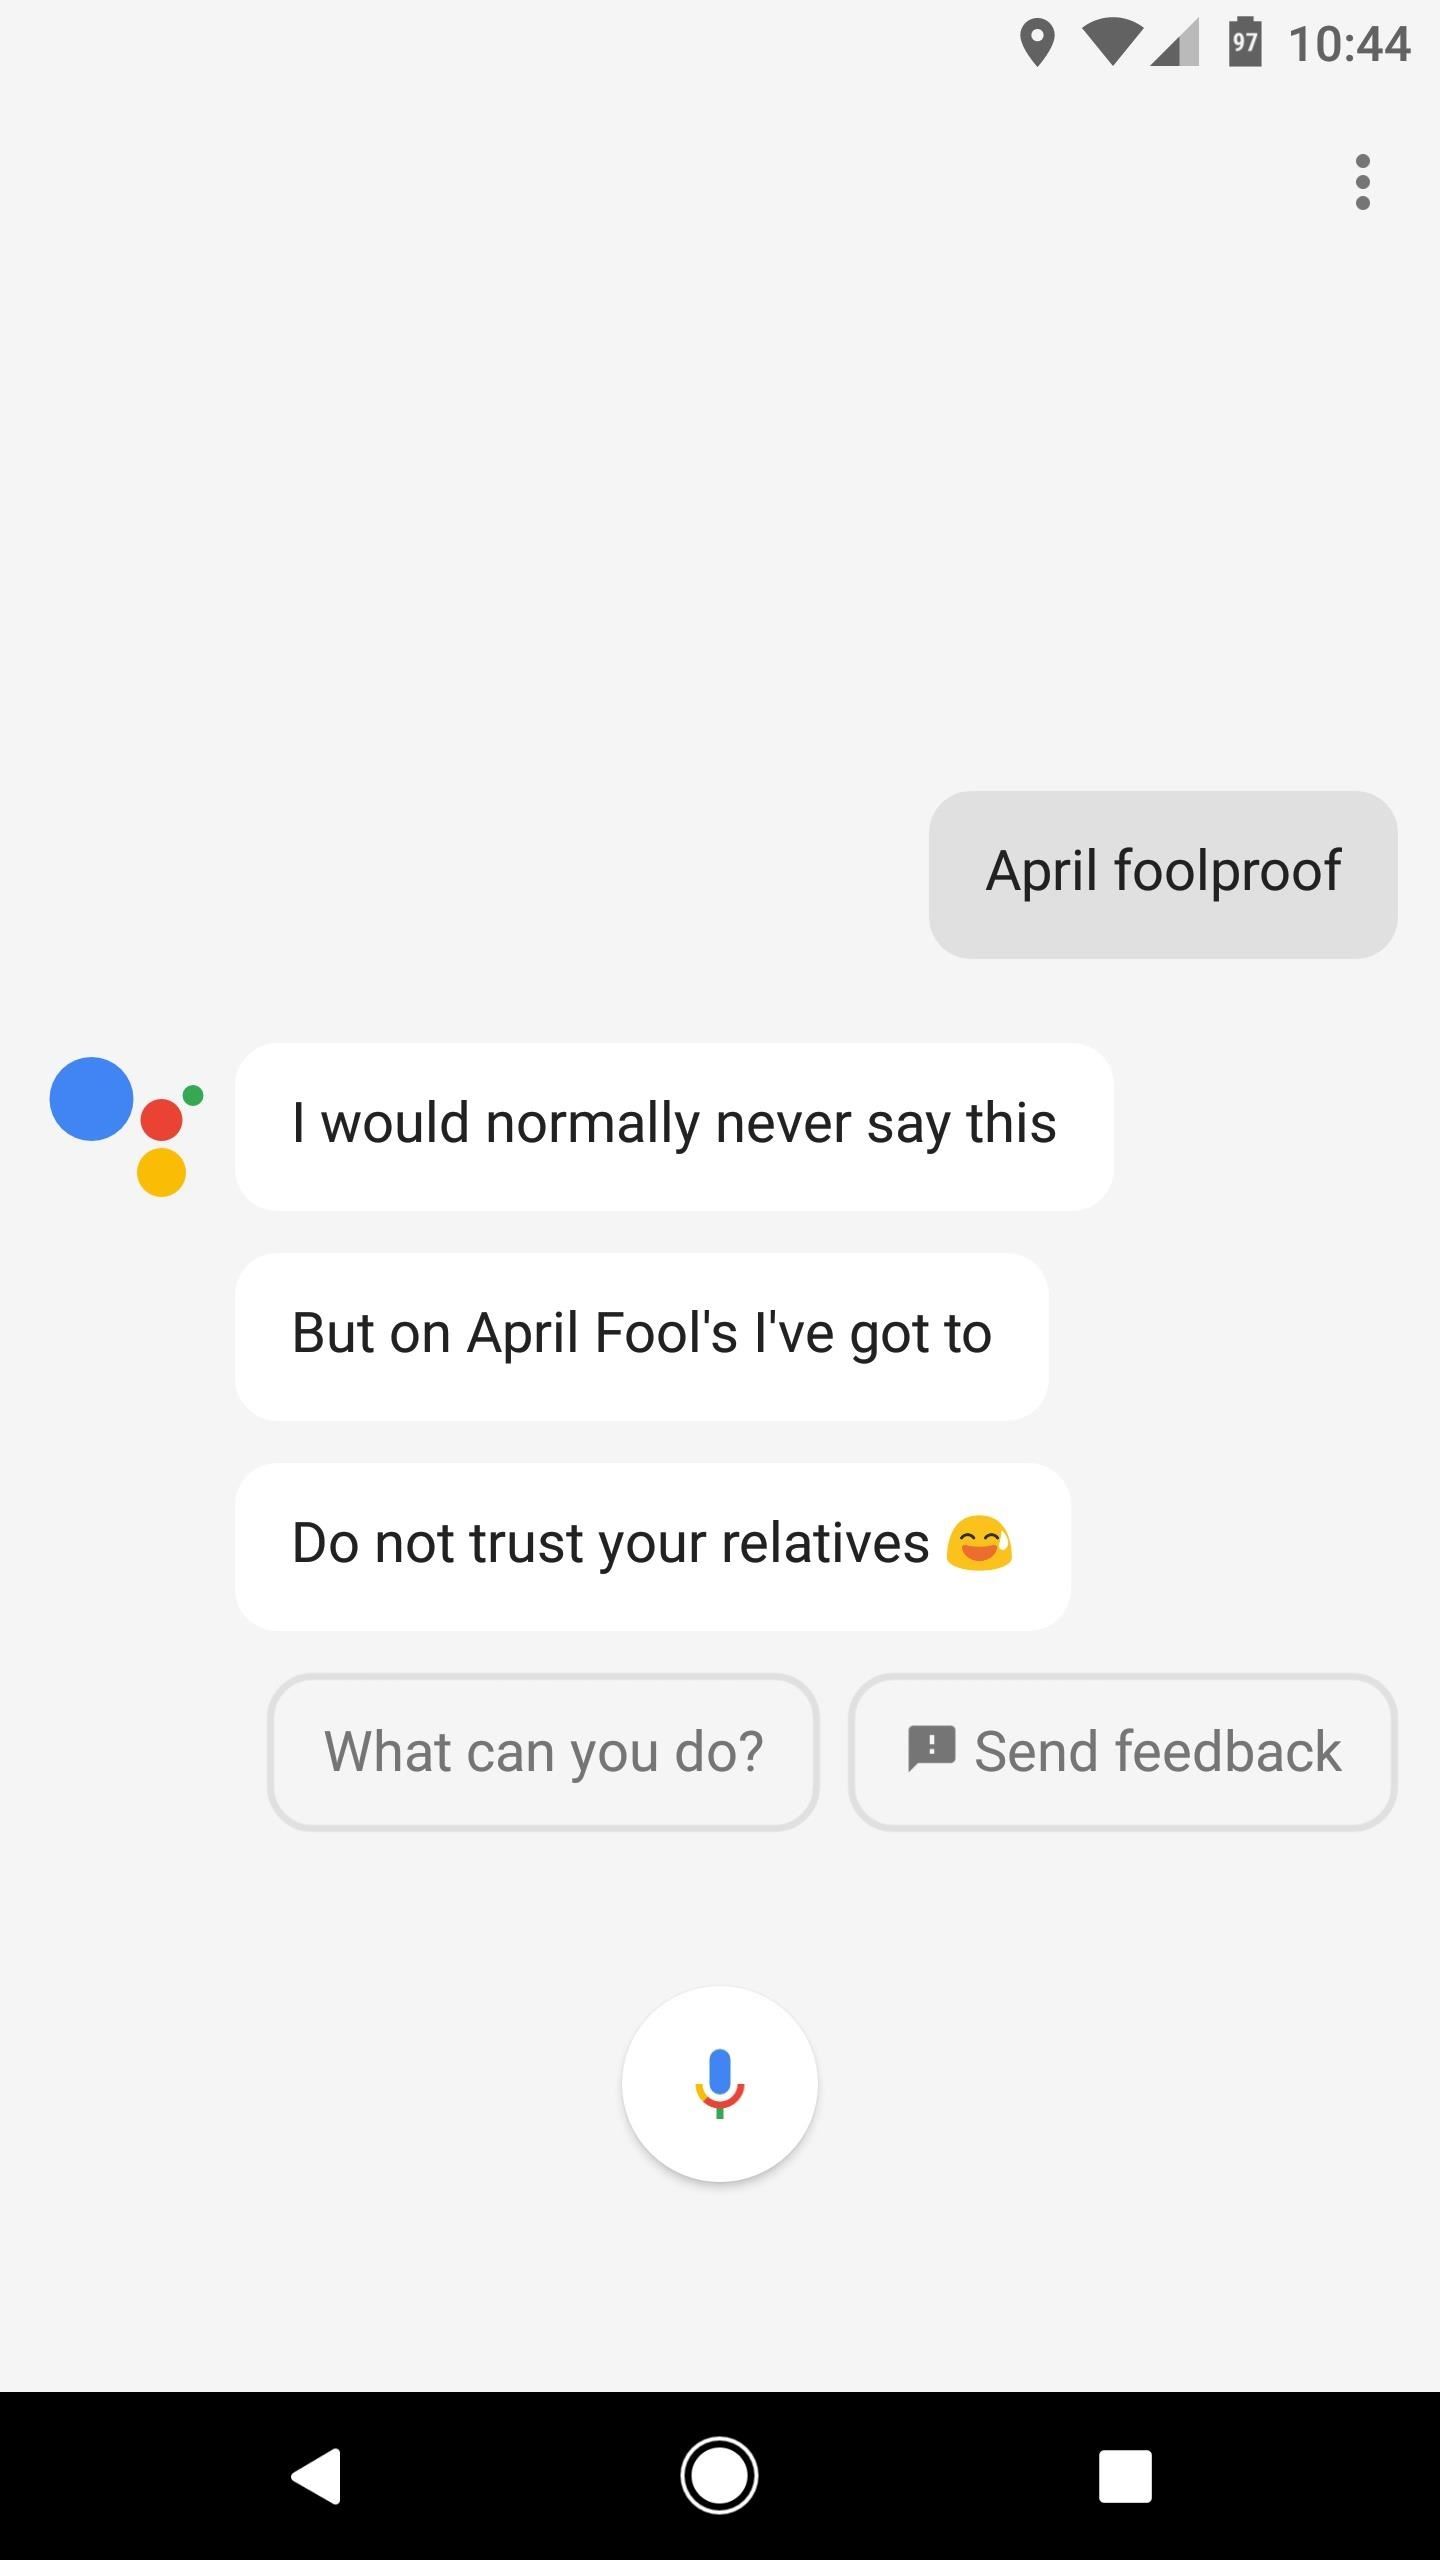 Google Assistant's 'April Foolproof' Command Will Help You Avoid Getting Pranked